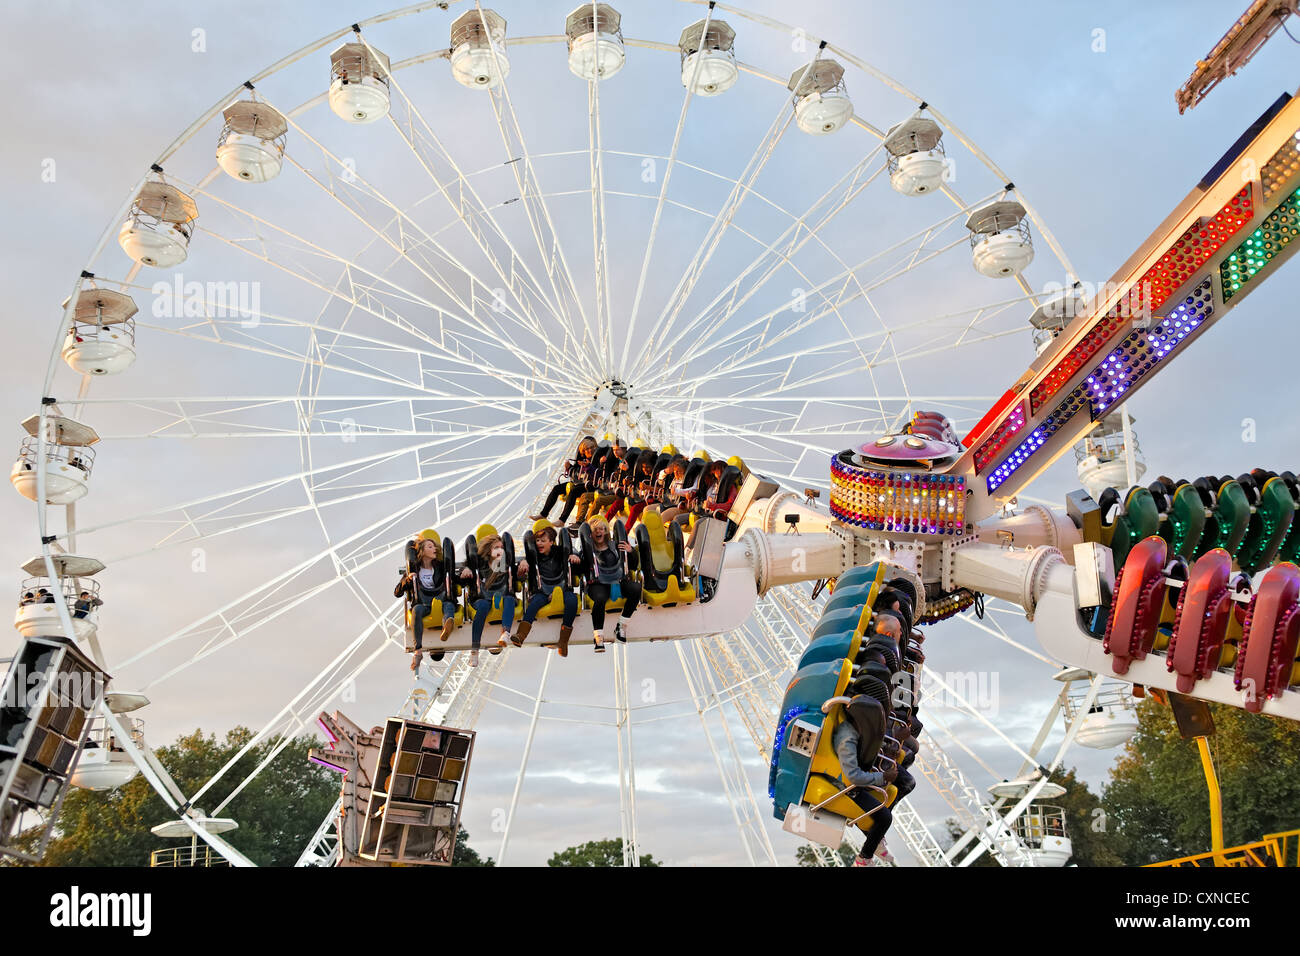 People riding  on the Top Buzz fairground ride at  Nottingham's  historic Goose Fair. Stock Photo